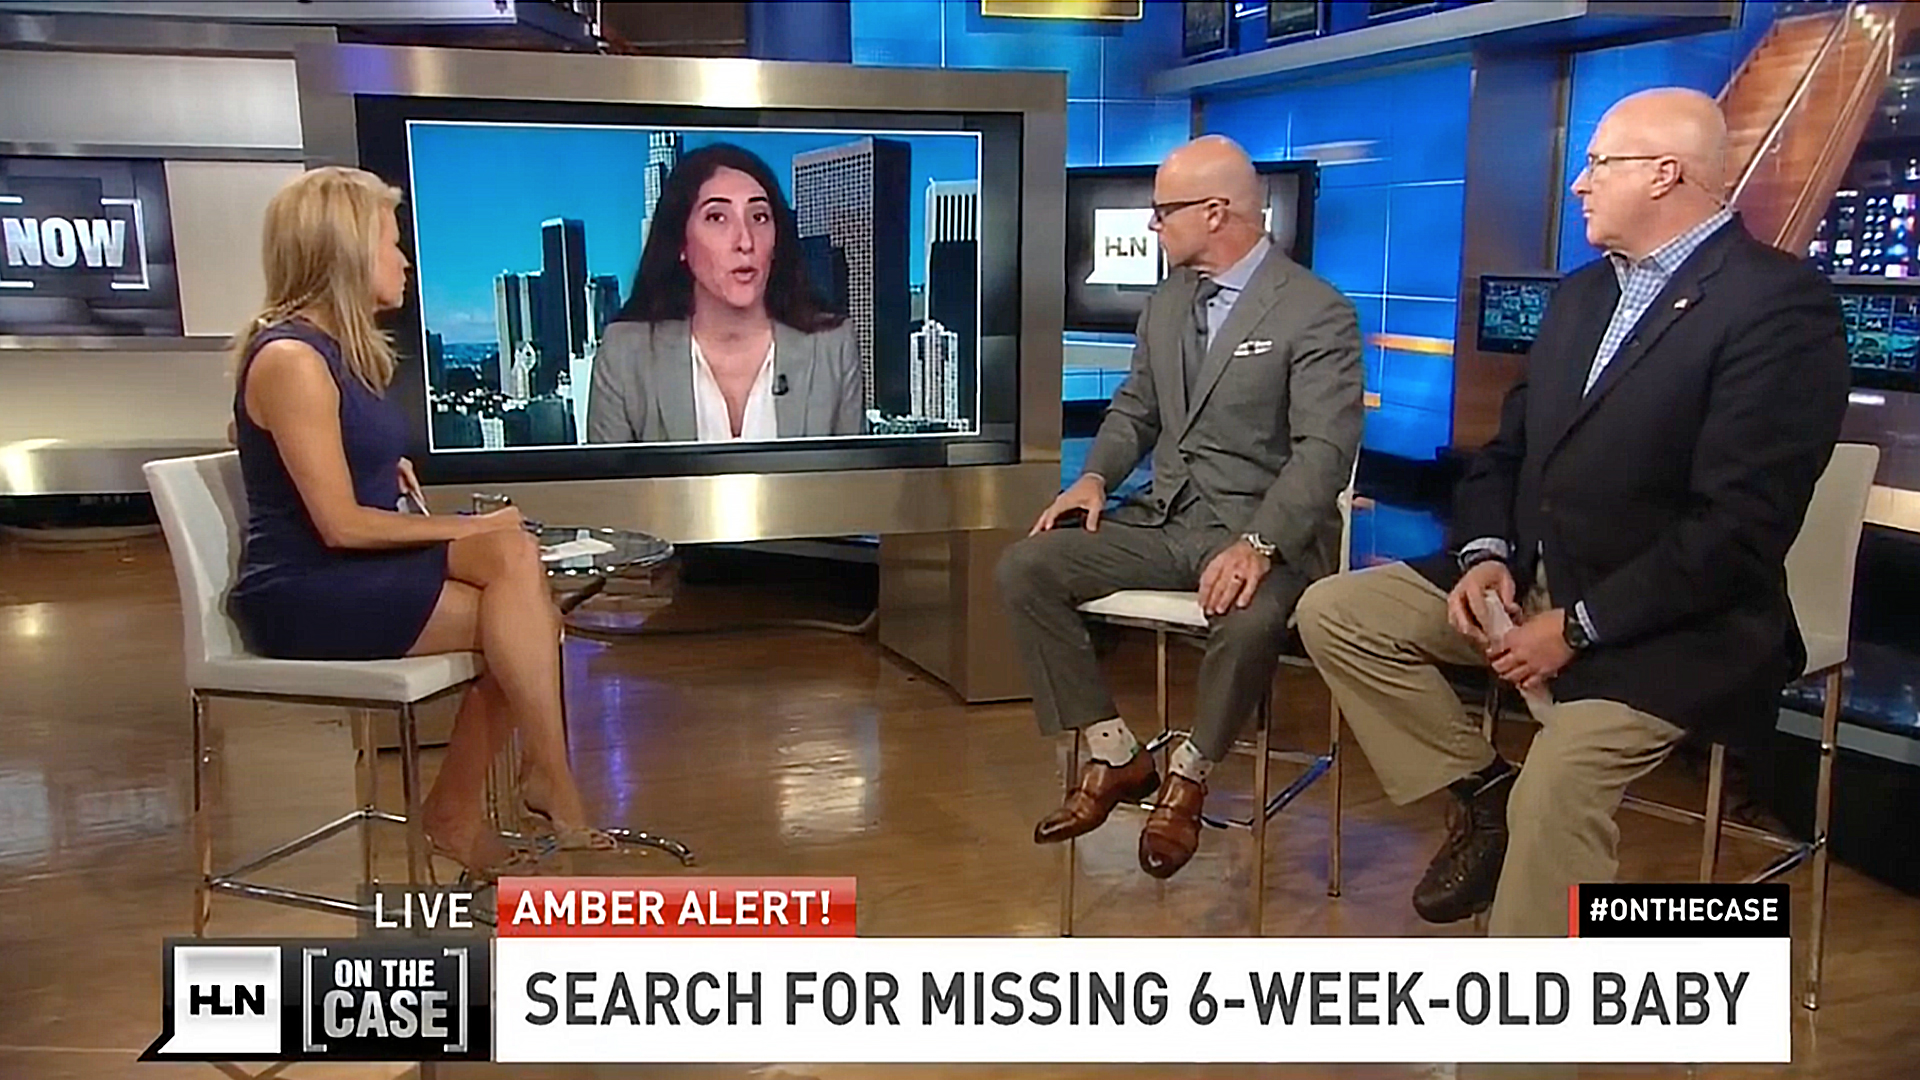 HLN: Searching for Missing Six-Week-Old Baby